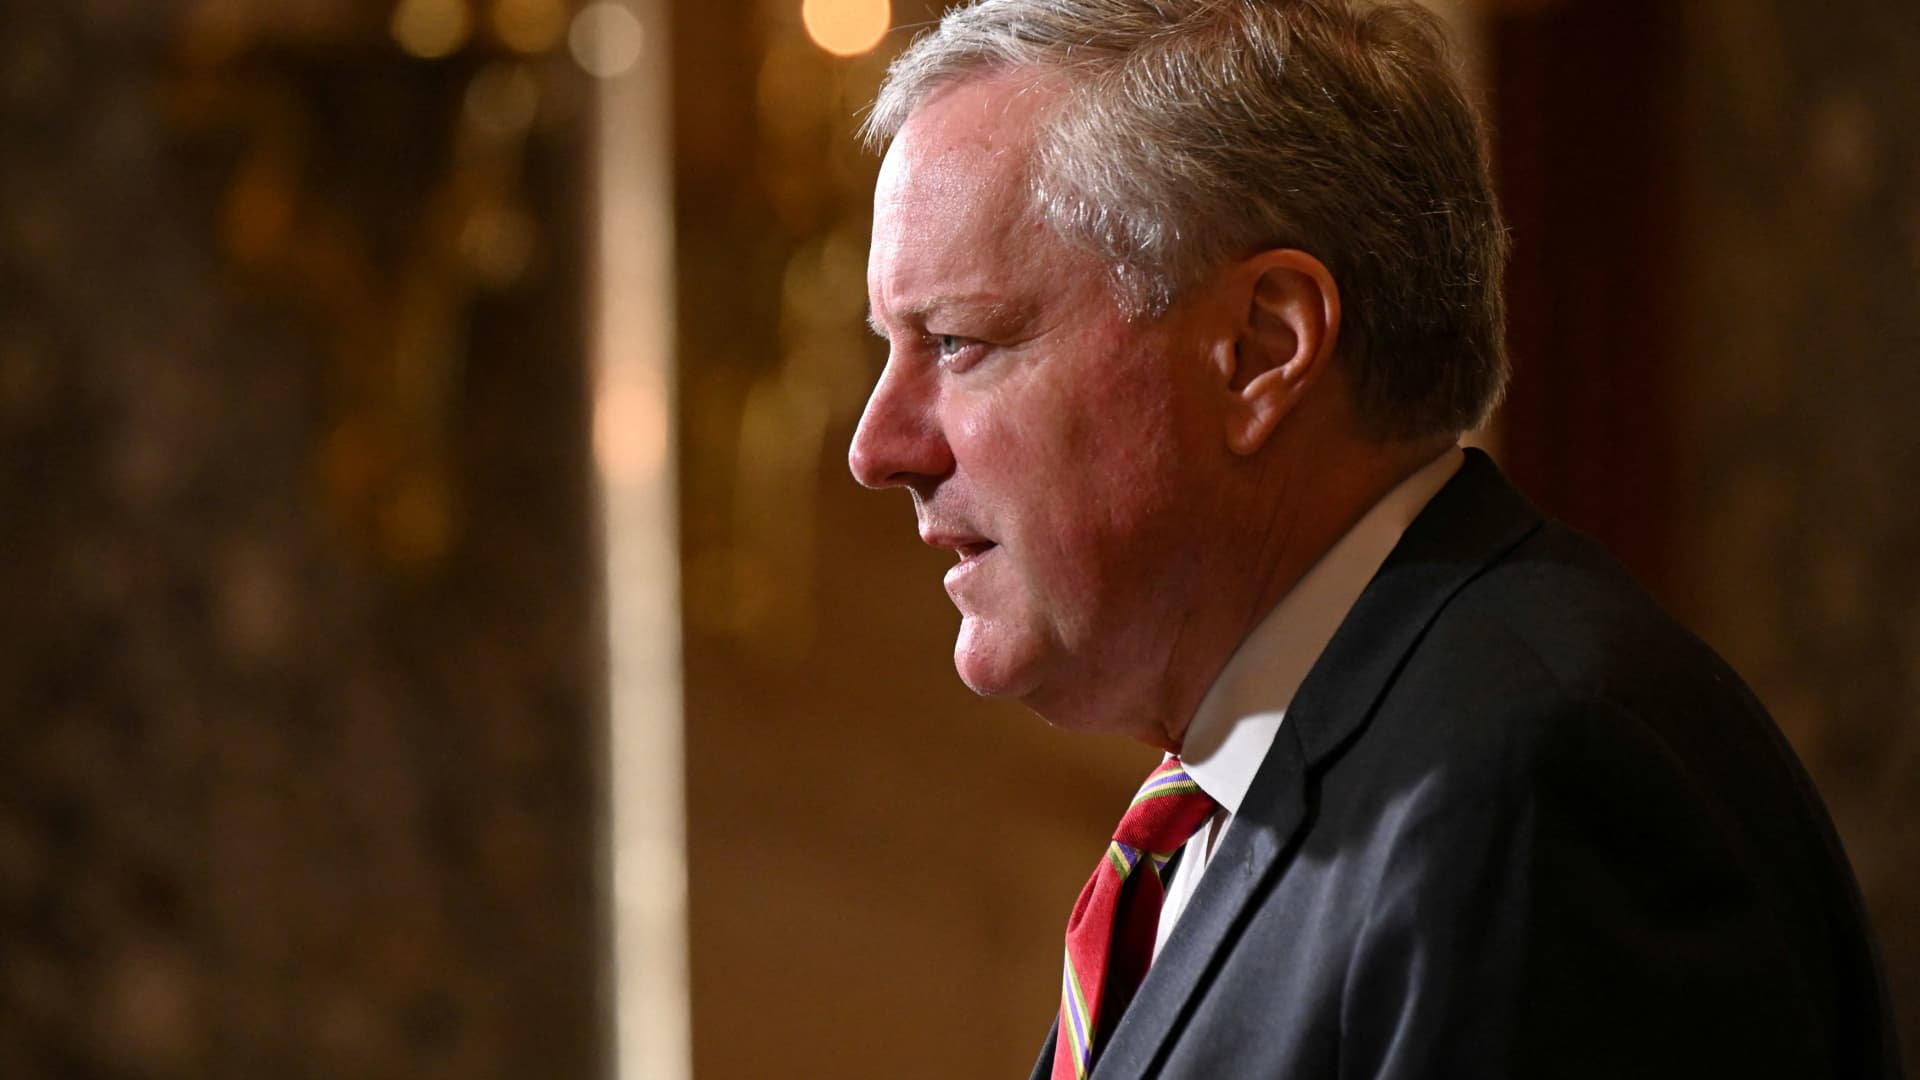 Then-White House Chief of Staff Mark Meadows speaks to reporters in the U.S. Capitol in Washington, July 29, 2020.